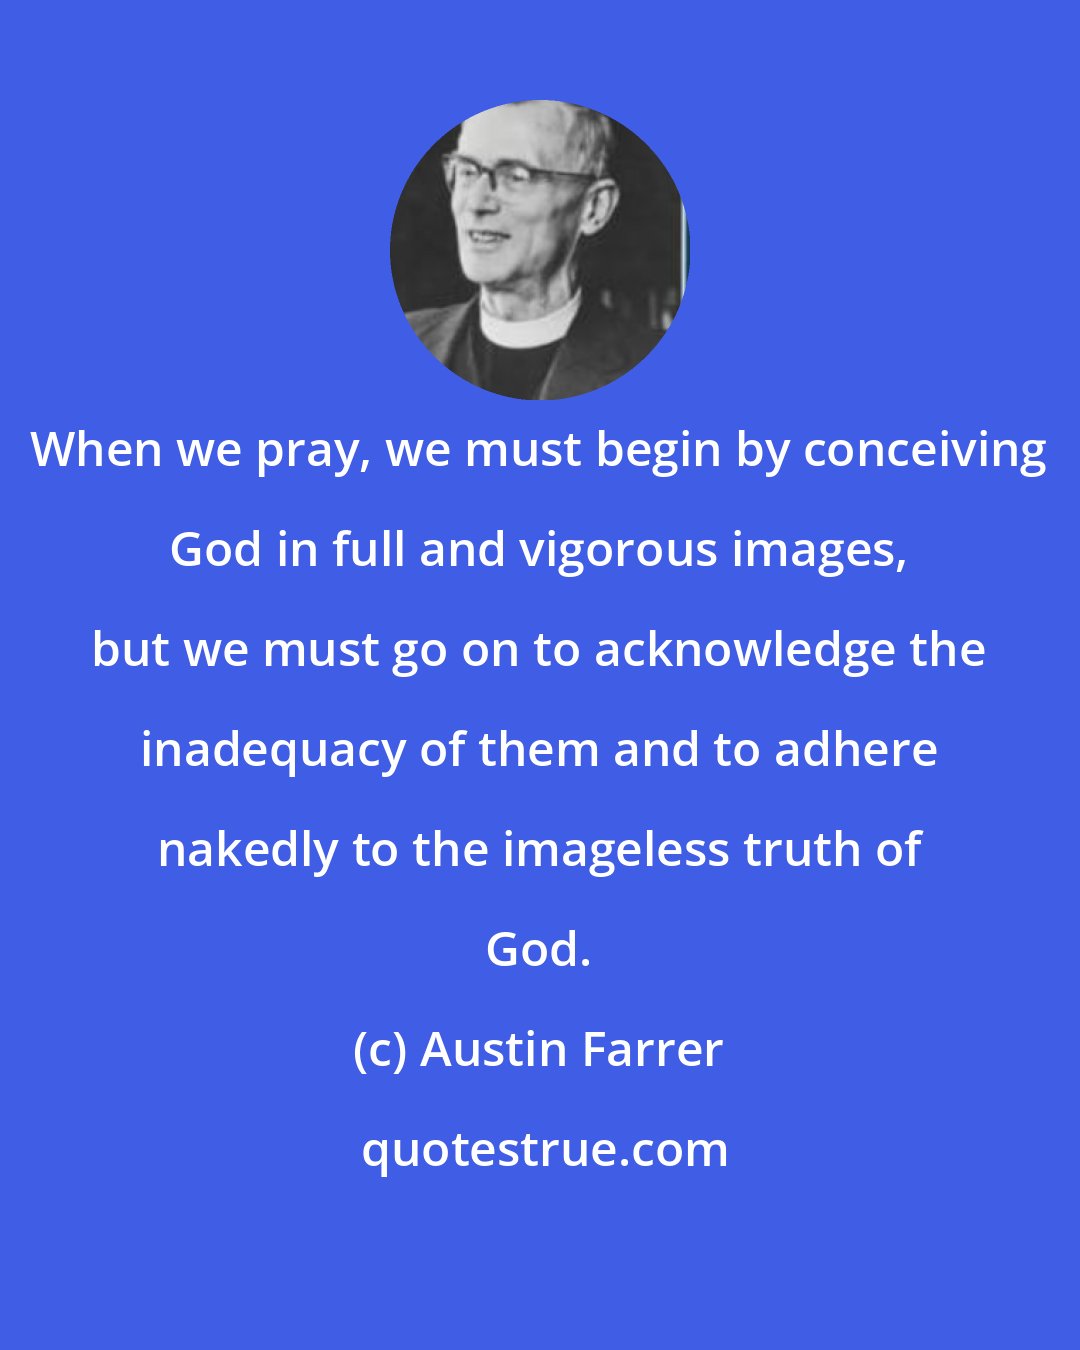 Austin Farrer: When we pray, we must begin by conceiving God in full and vigorous images, but we must go on to acknowledge the inadequacy of them and to adhere nakedly to the imageless truth of God.